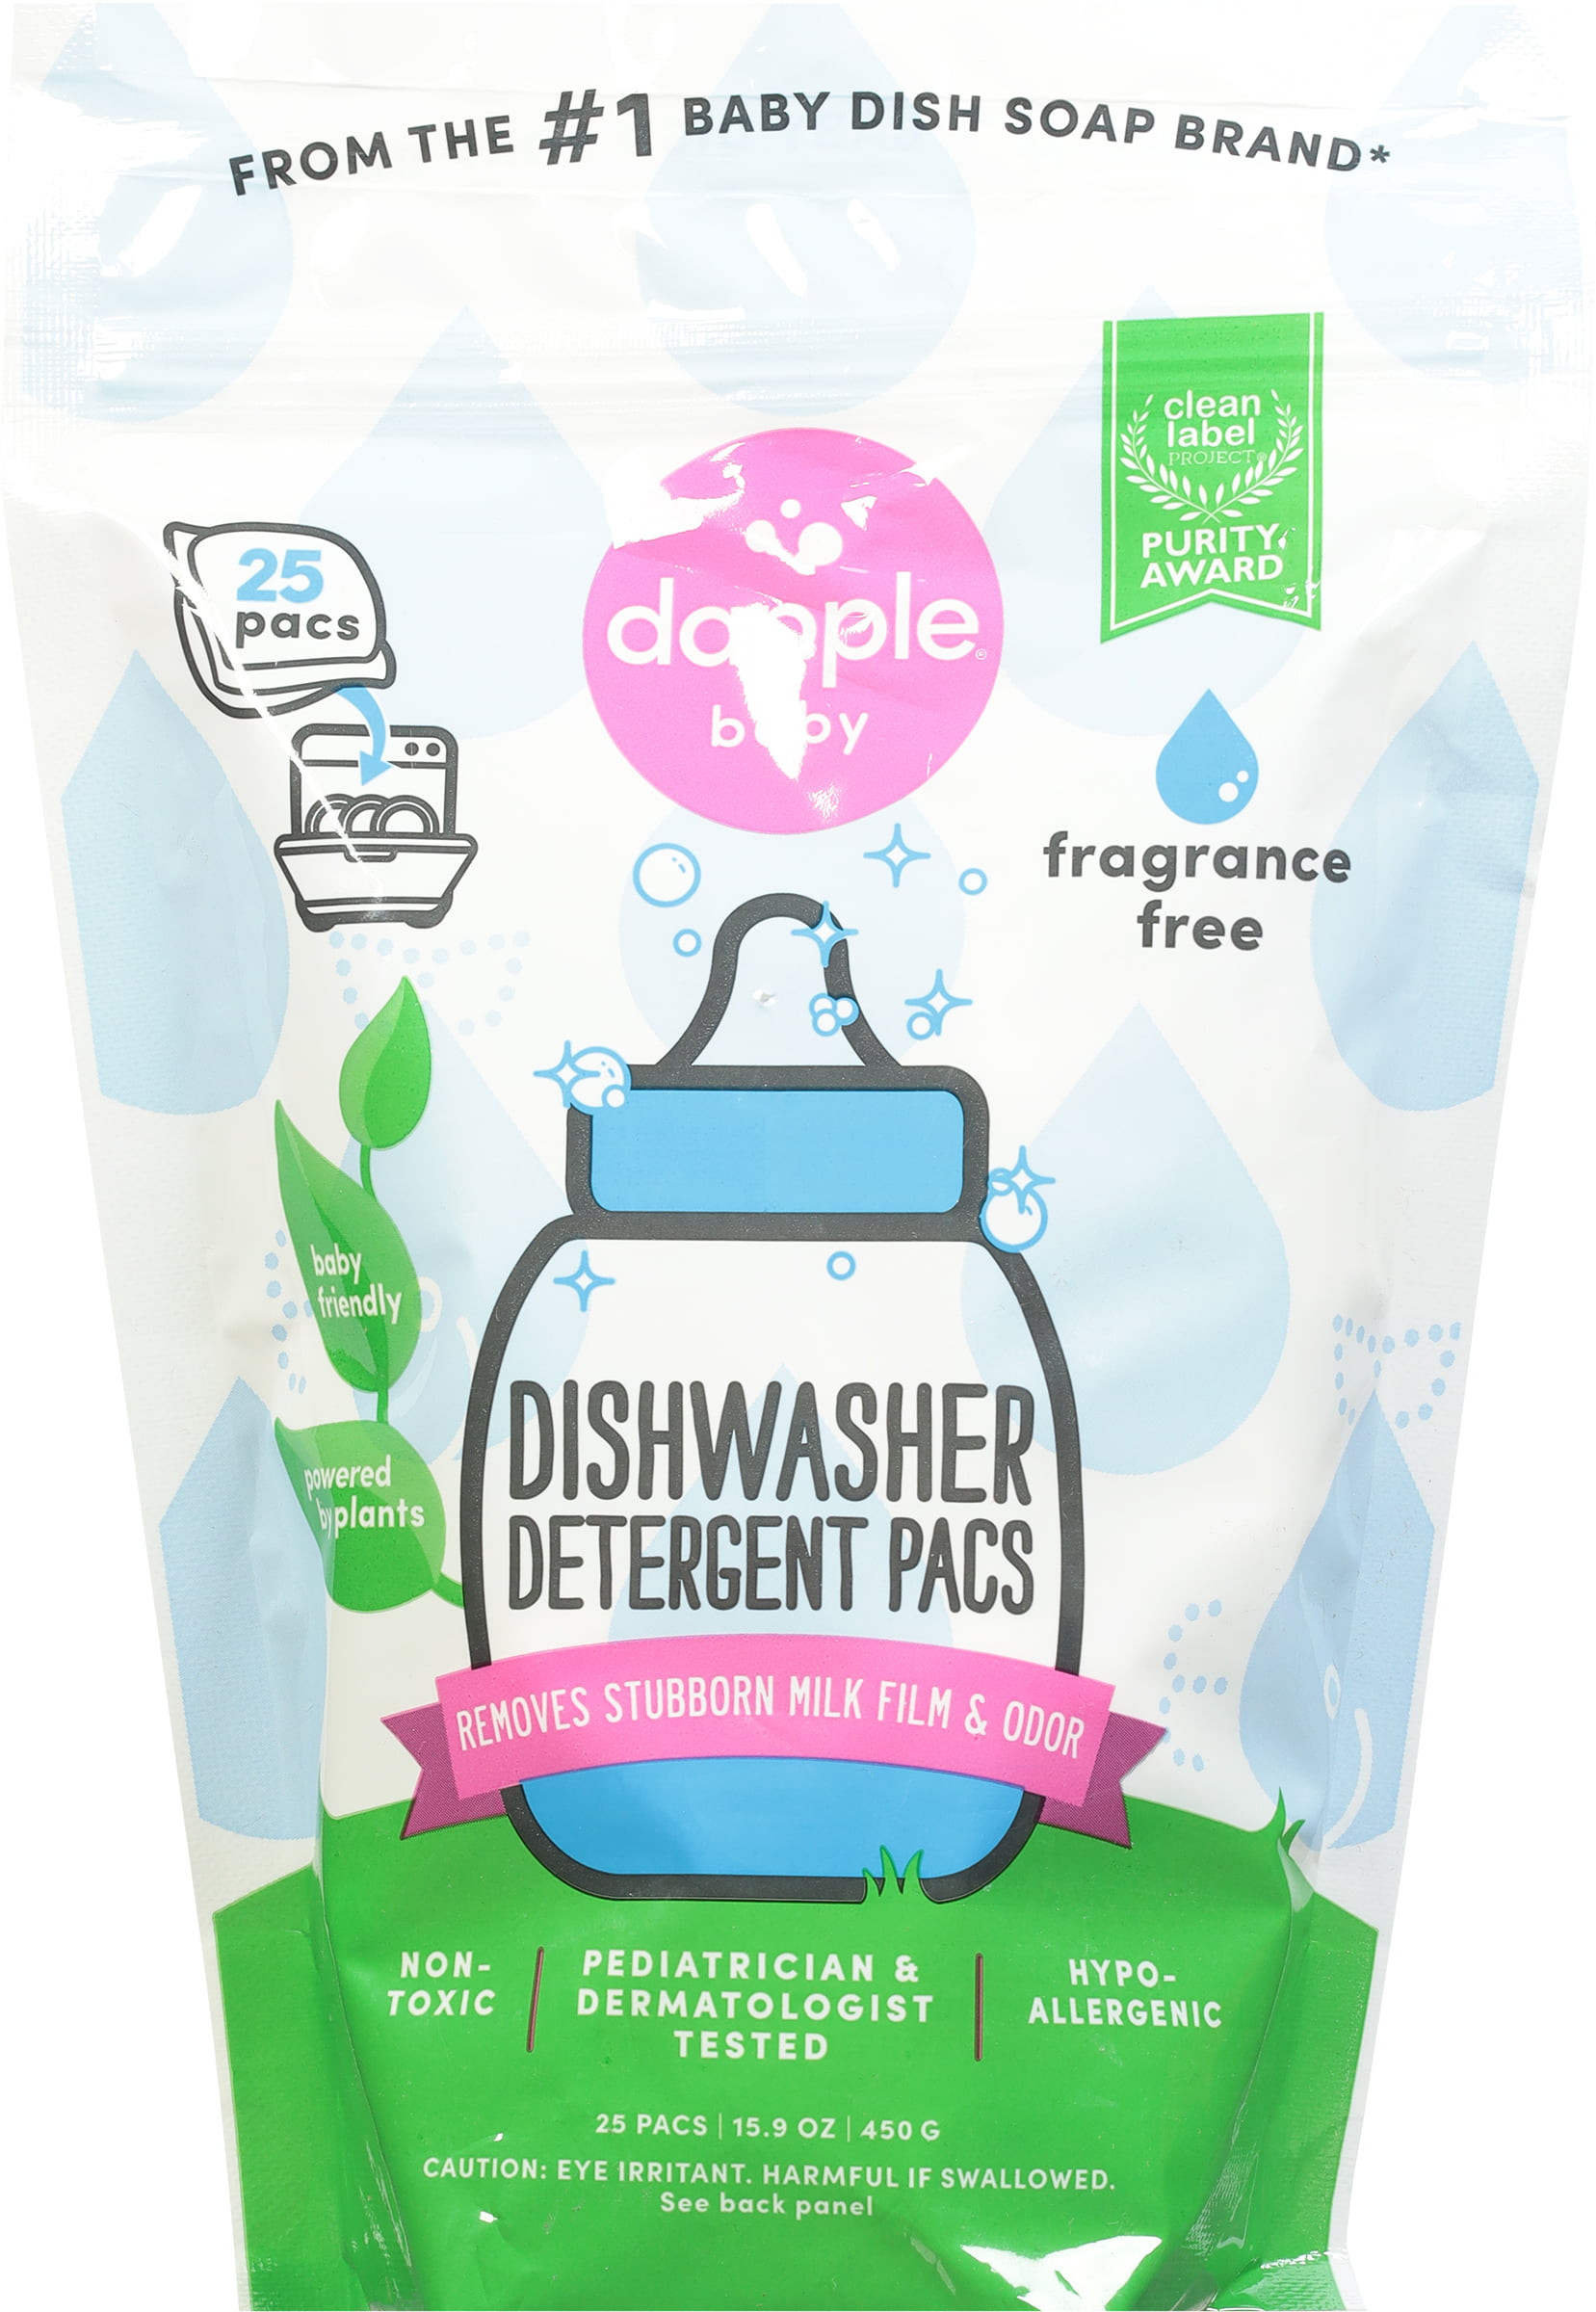 Dishwasher Detergent Pacs by Dapple Baby, 25 Count Pouch (Pack of 2),  Fragrance Free, Plant Based